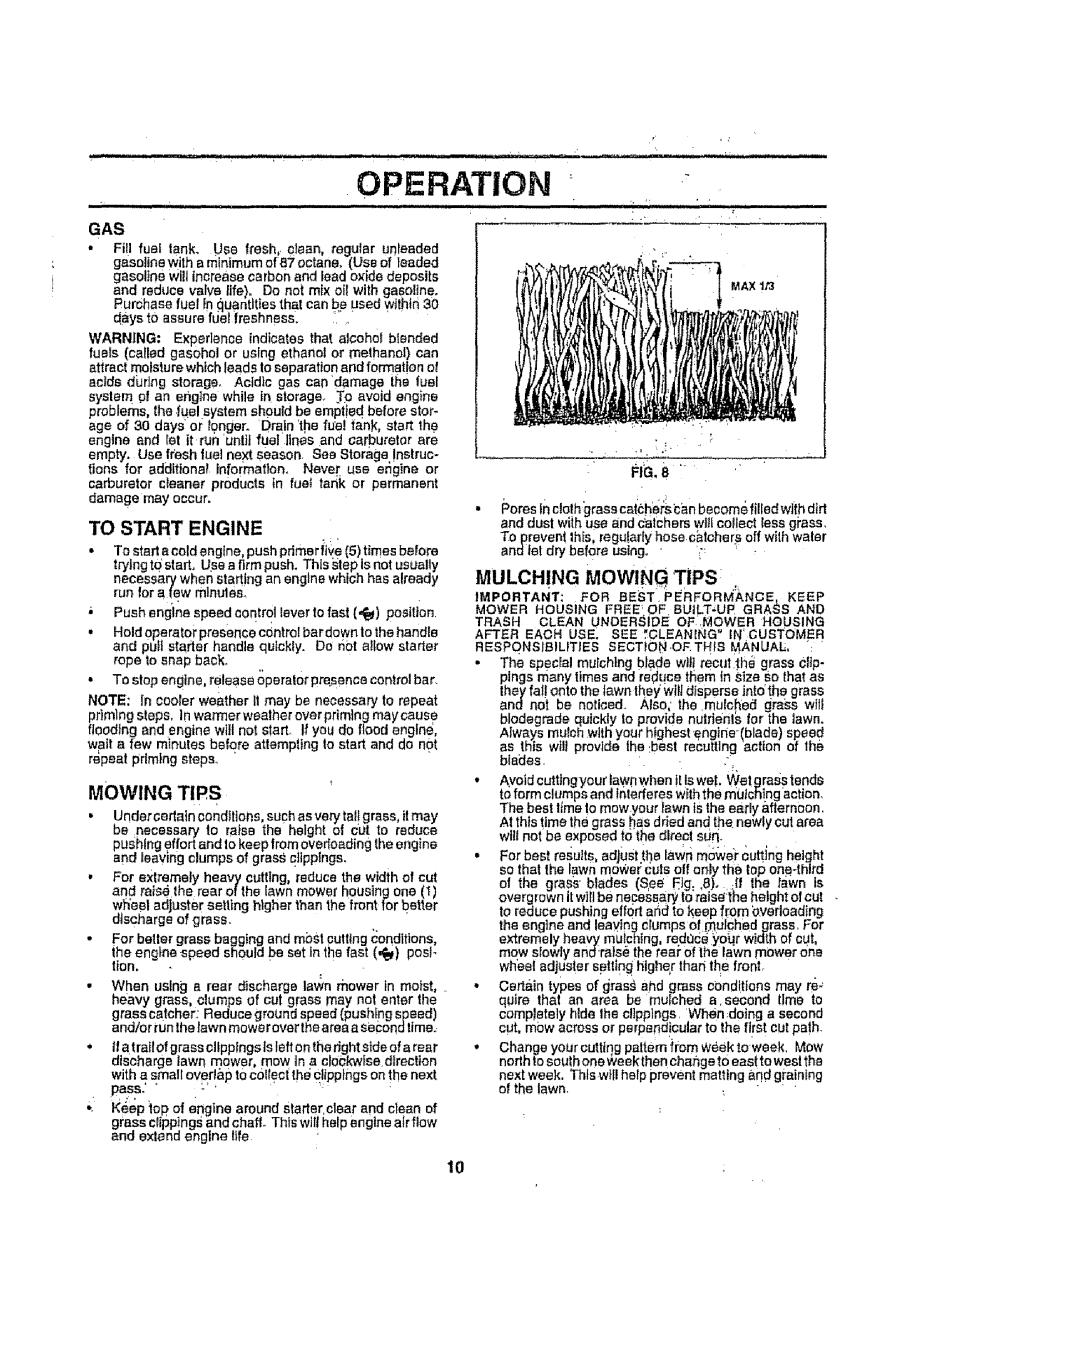 Sears 917386121 owner manual To Start Engine, Mulching Mowing Tips, Operation 